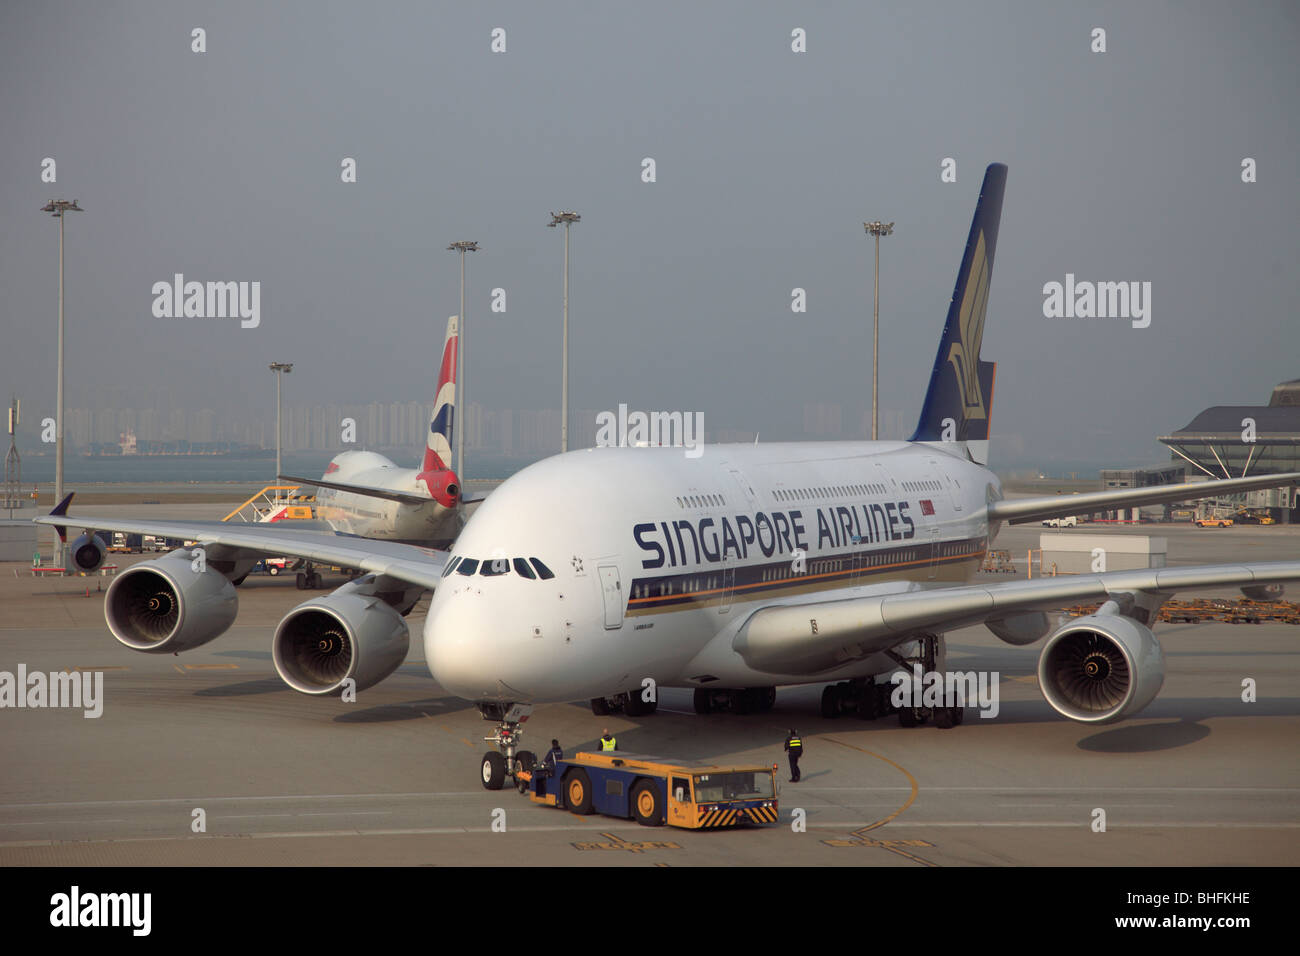 Singapore Airlines Airbus A 380 jet airplane Stock Photo